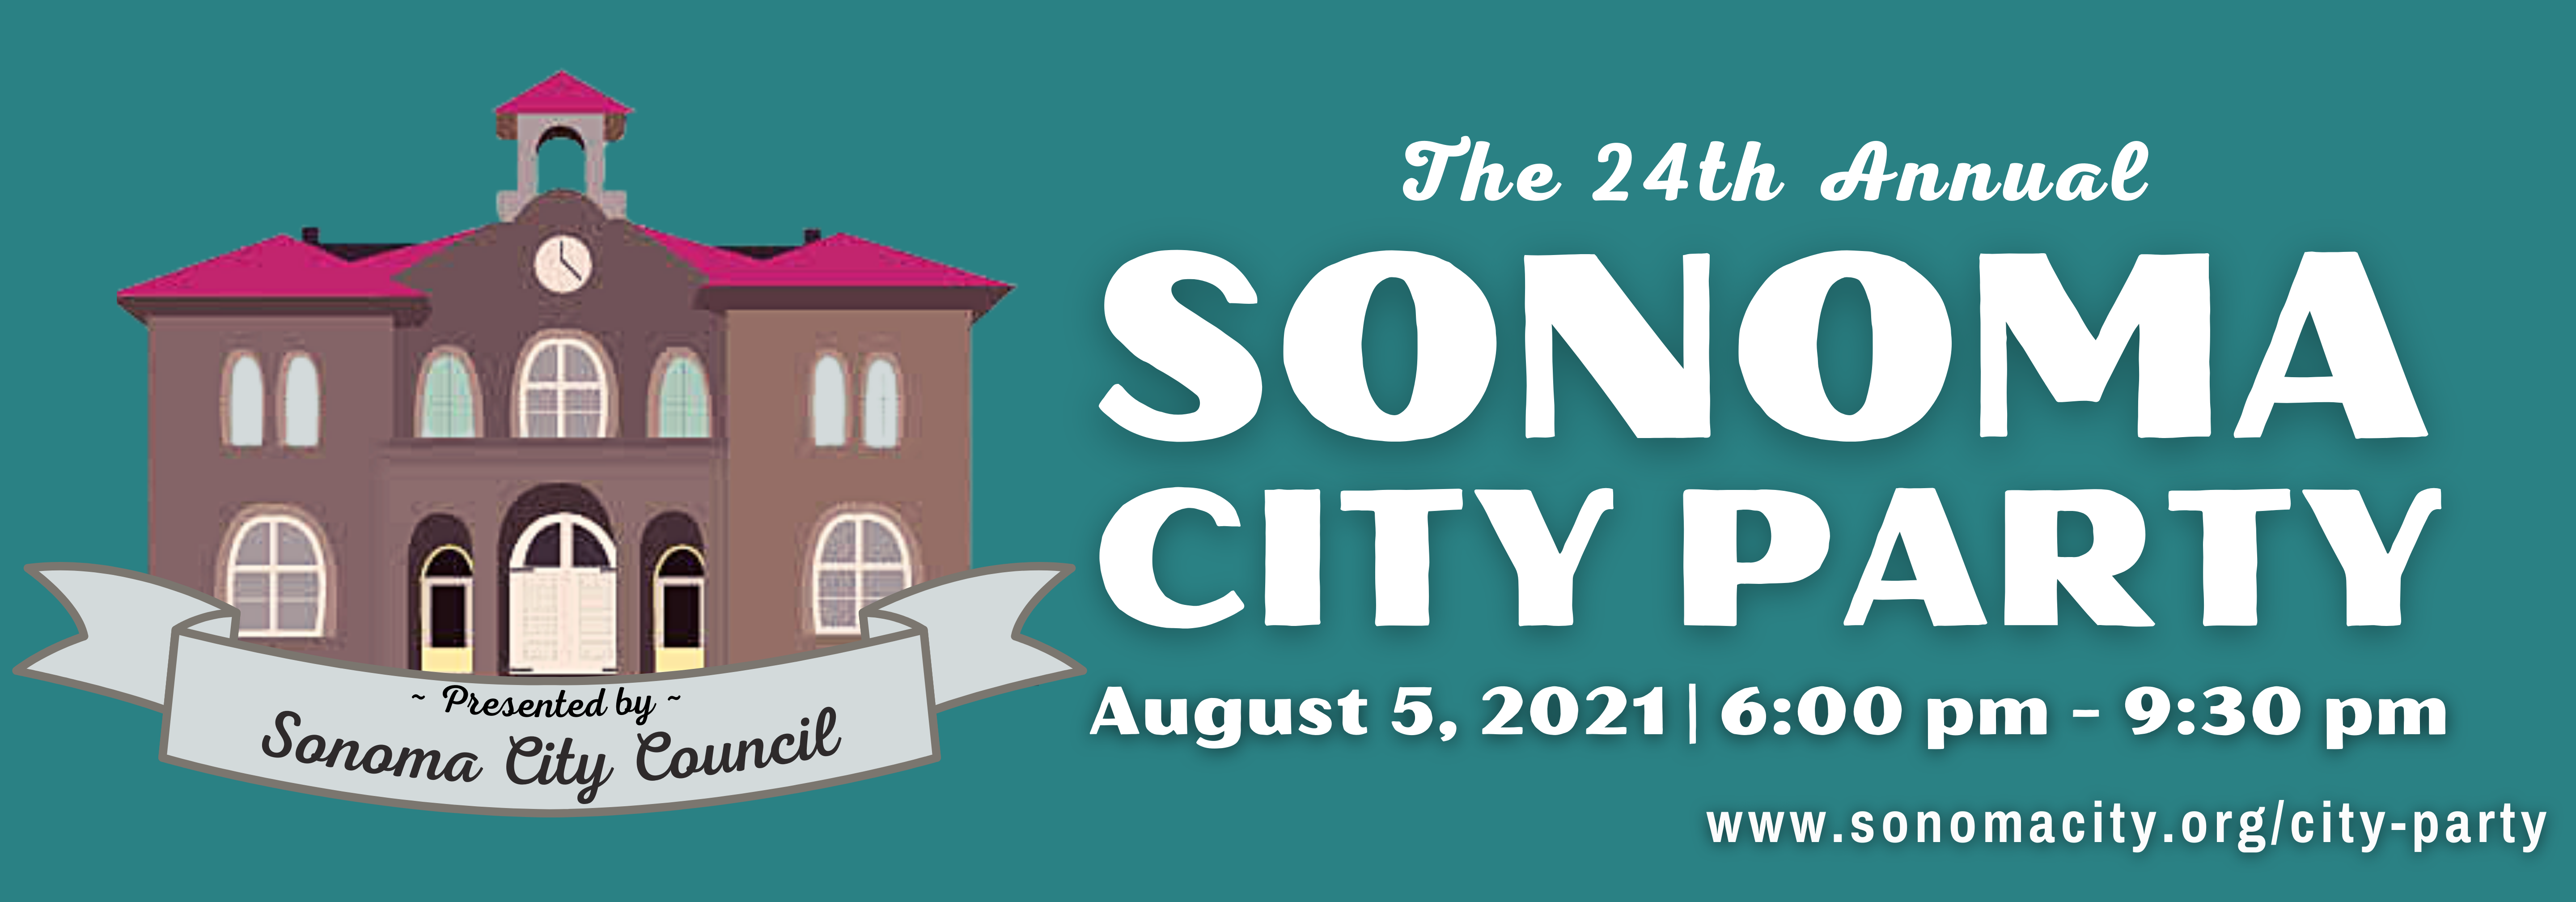 Sonoma City Party Returns to the Plaza Thursday, August 5th City of